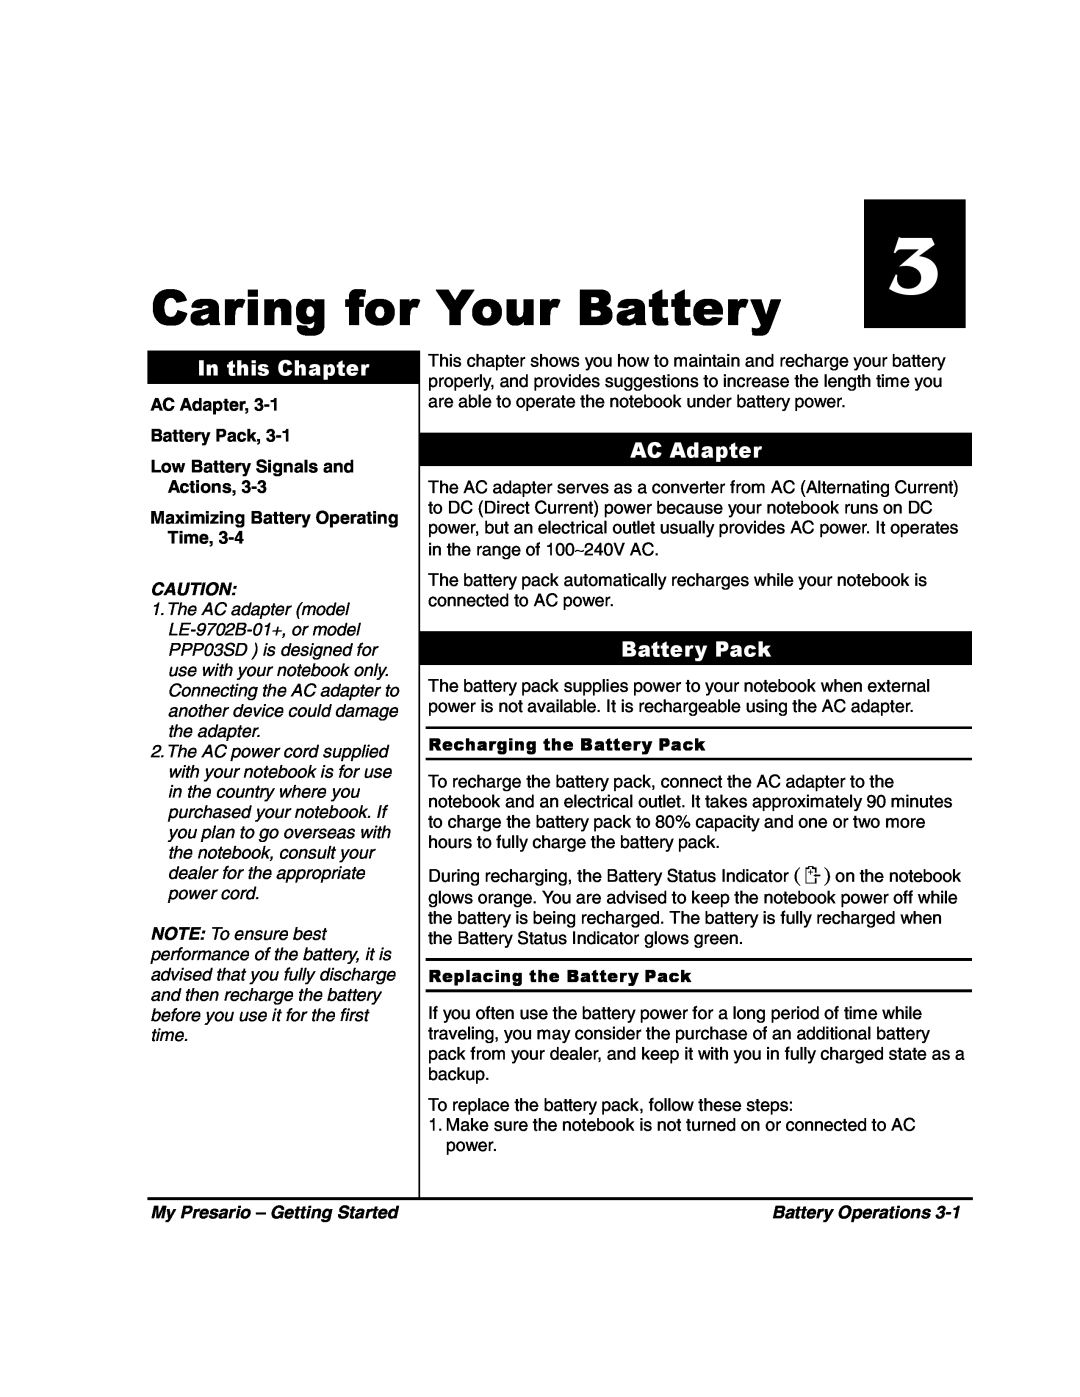 HP 80XL302 manual Caring for Your Battery, AC Adapter, Battery Pack, In this Chapter, Maximizing Battery Operating Time 